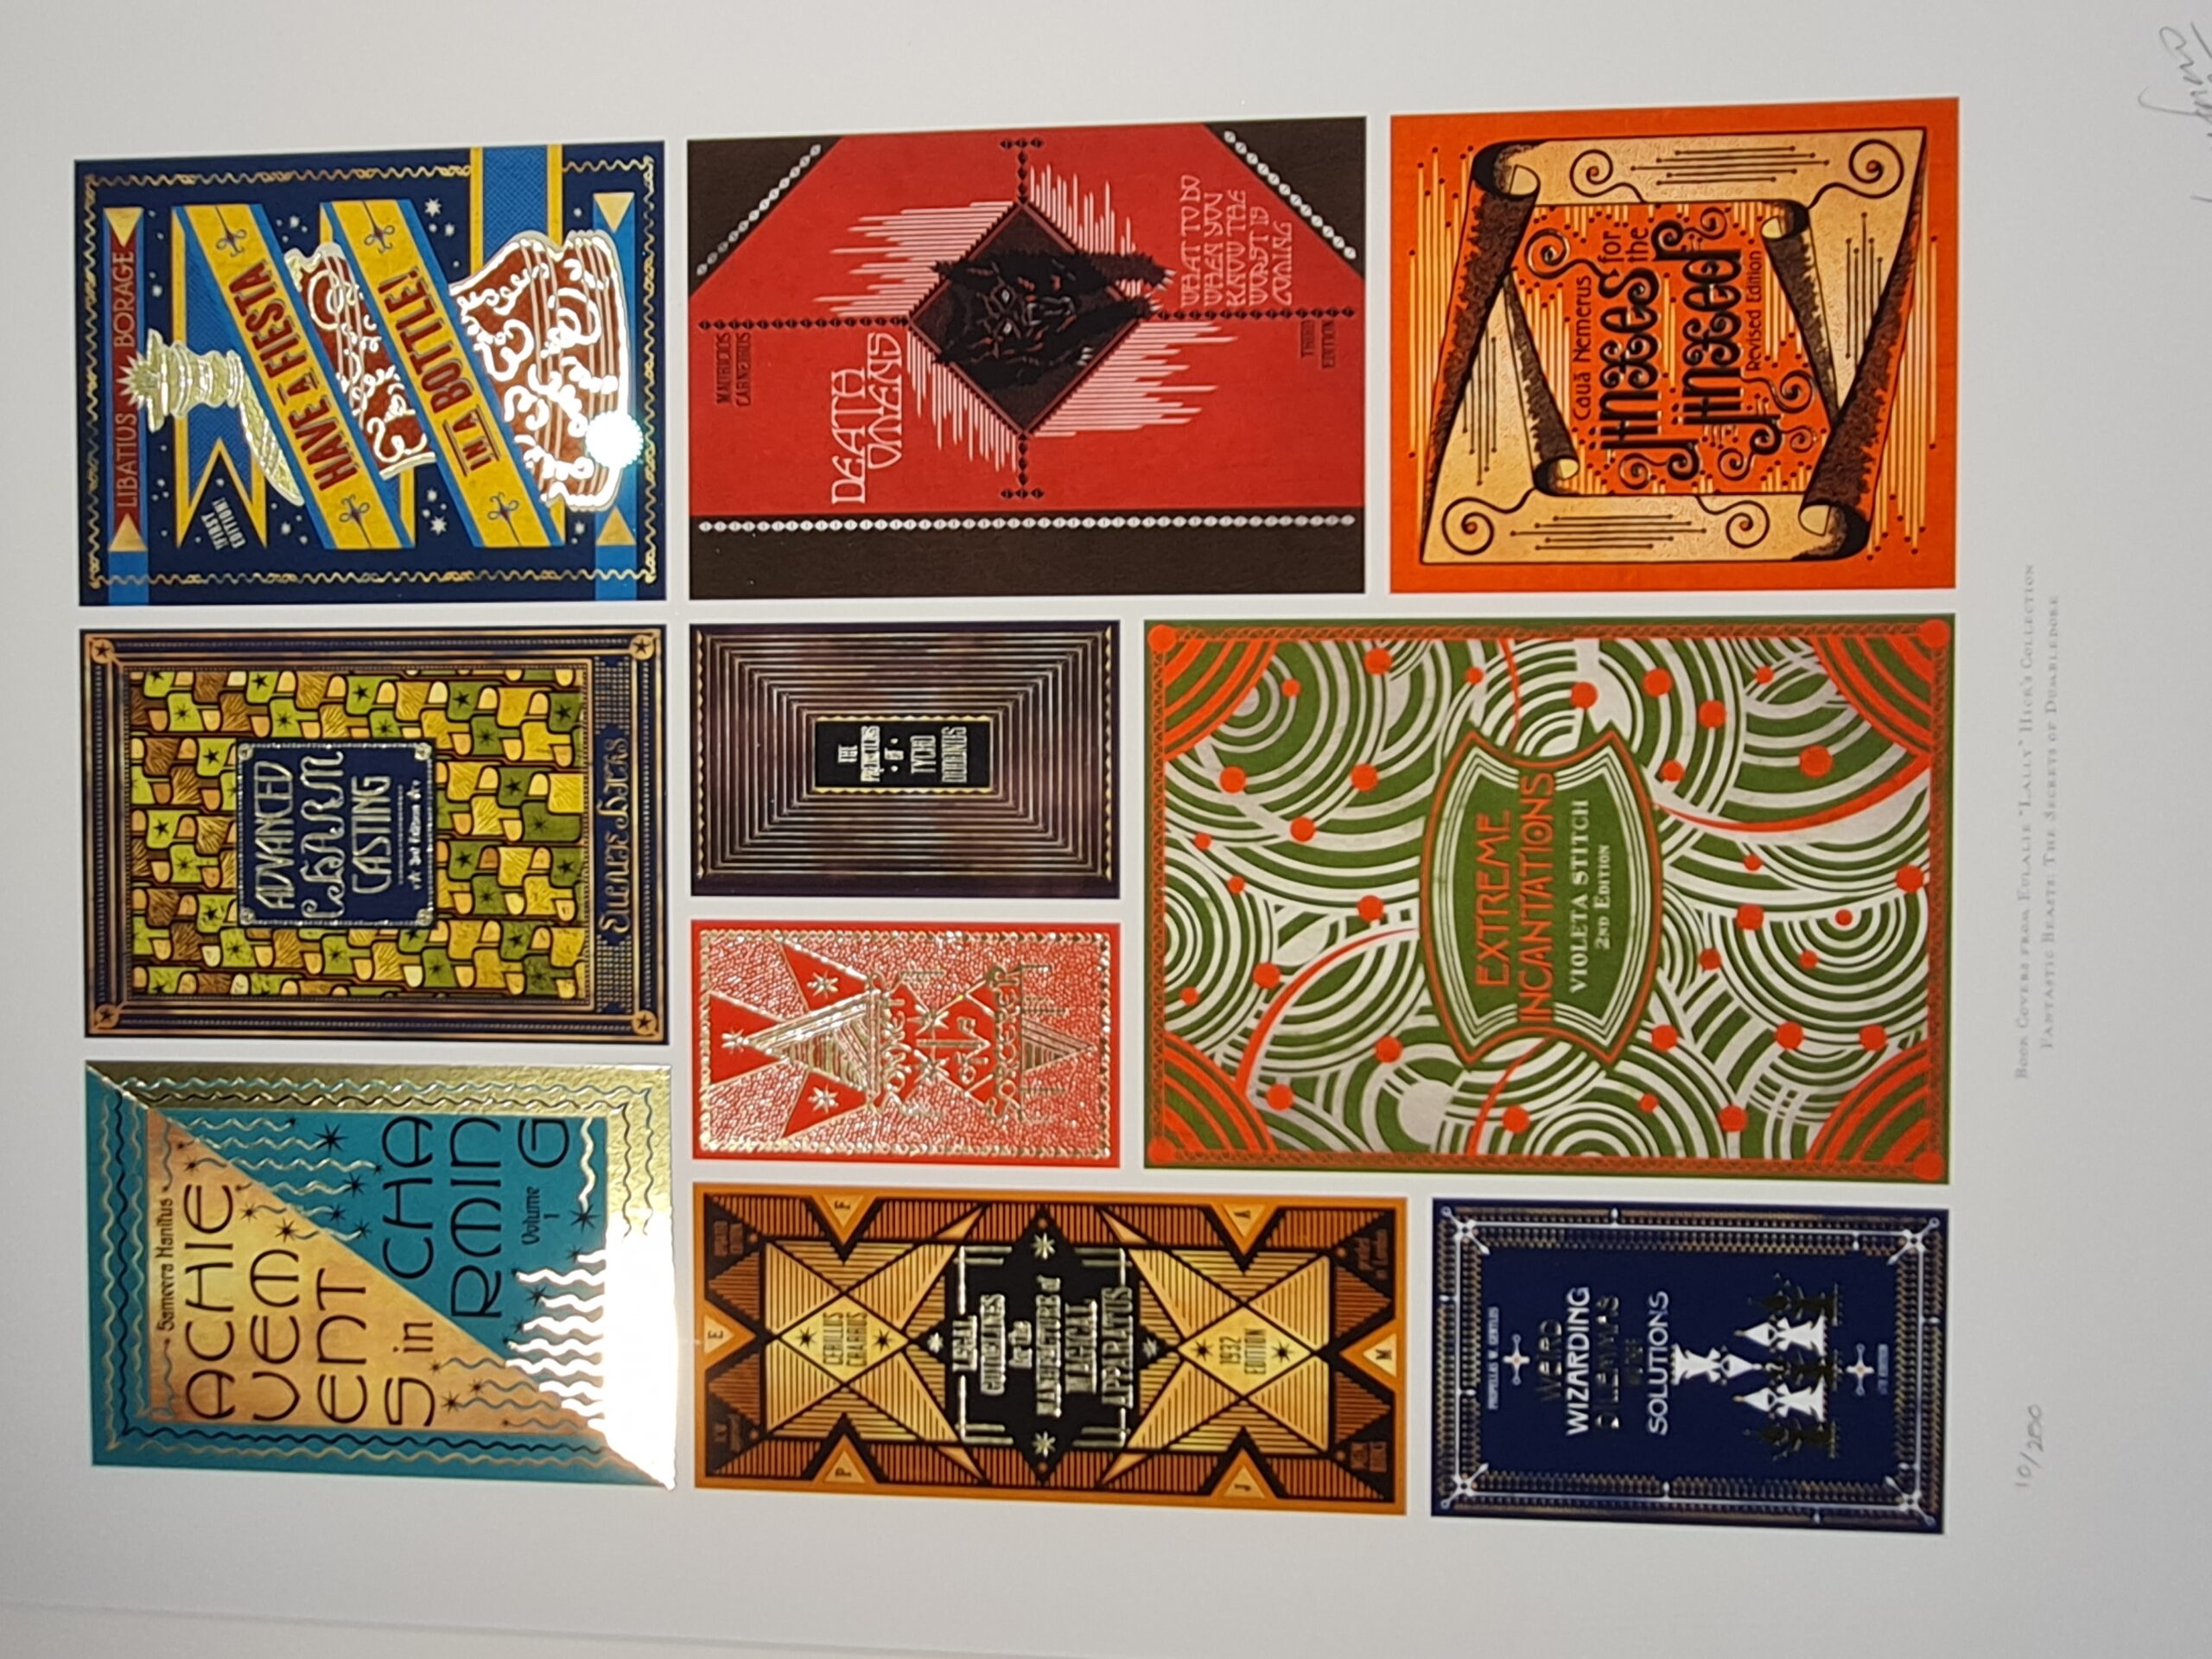 Covers of spellbooks owned by Professor Eulalie “Lally” Hicks designed by MinaLima for “Fantastic Beasts: The Secrets of Dumbledore.”